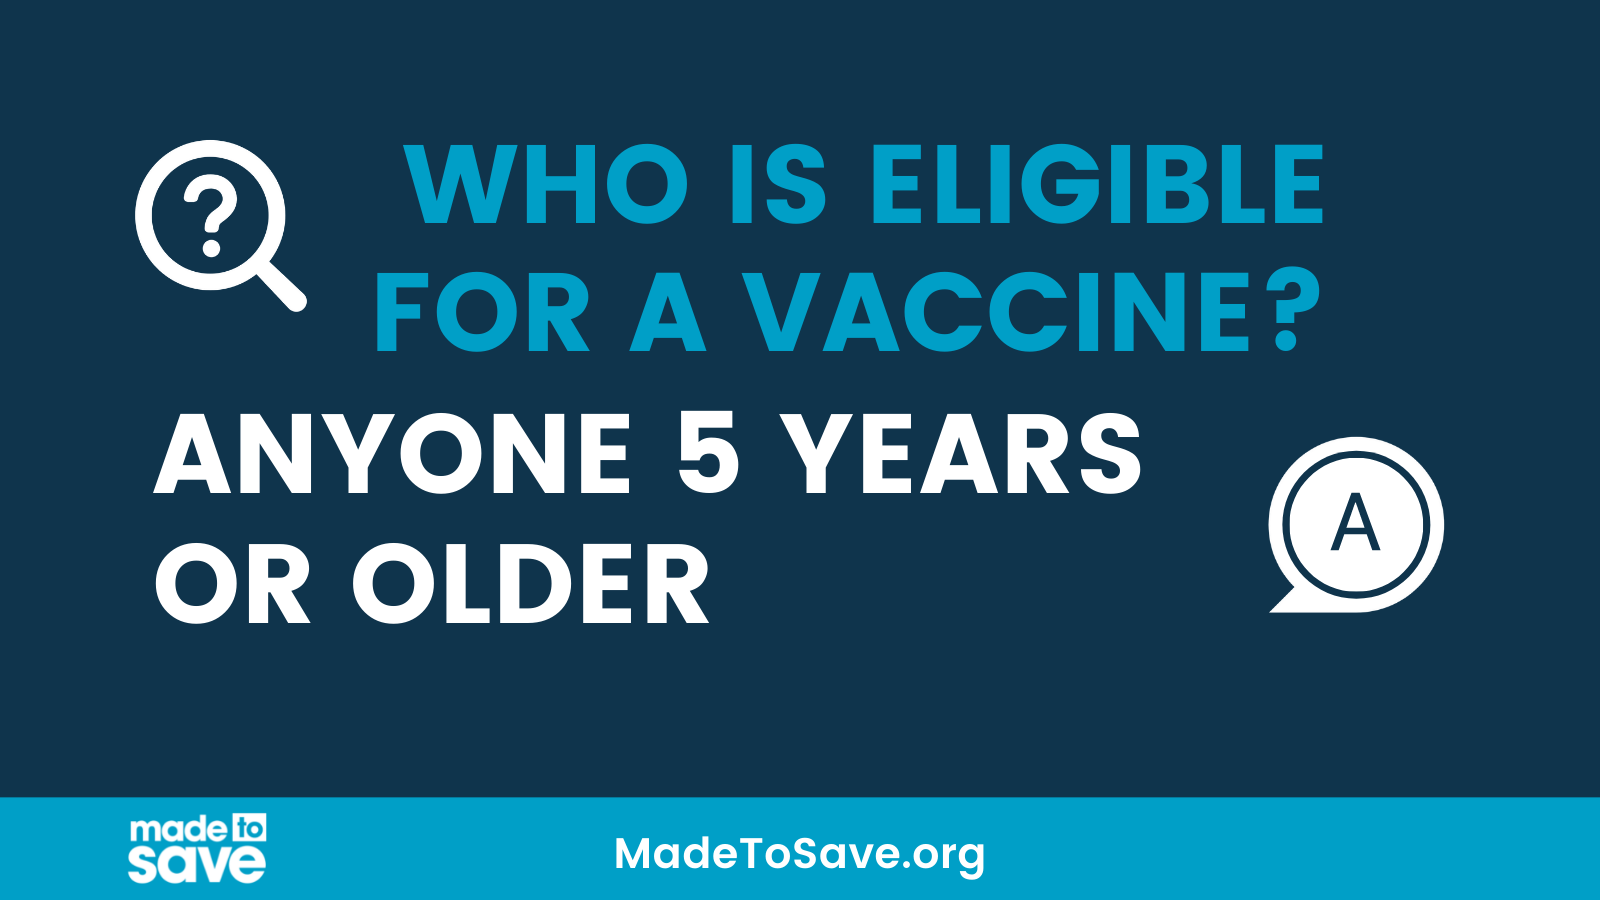 Graphic with dark blue background. In light blue text at the top reads, "Who is eligible for a vaccine?" Below, in white text says, "Anyone 5 years or older." At the bottom of the graphic is a light blue border. The Made to Save logo in white is in the bottom left corner. MadeToSave.org is centered at the bottom of the graphic.